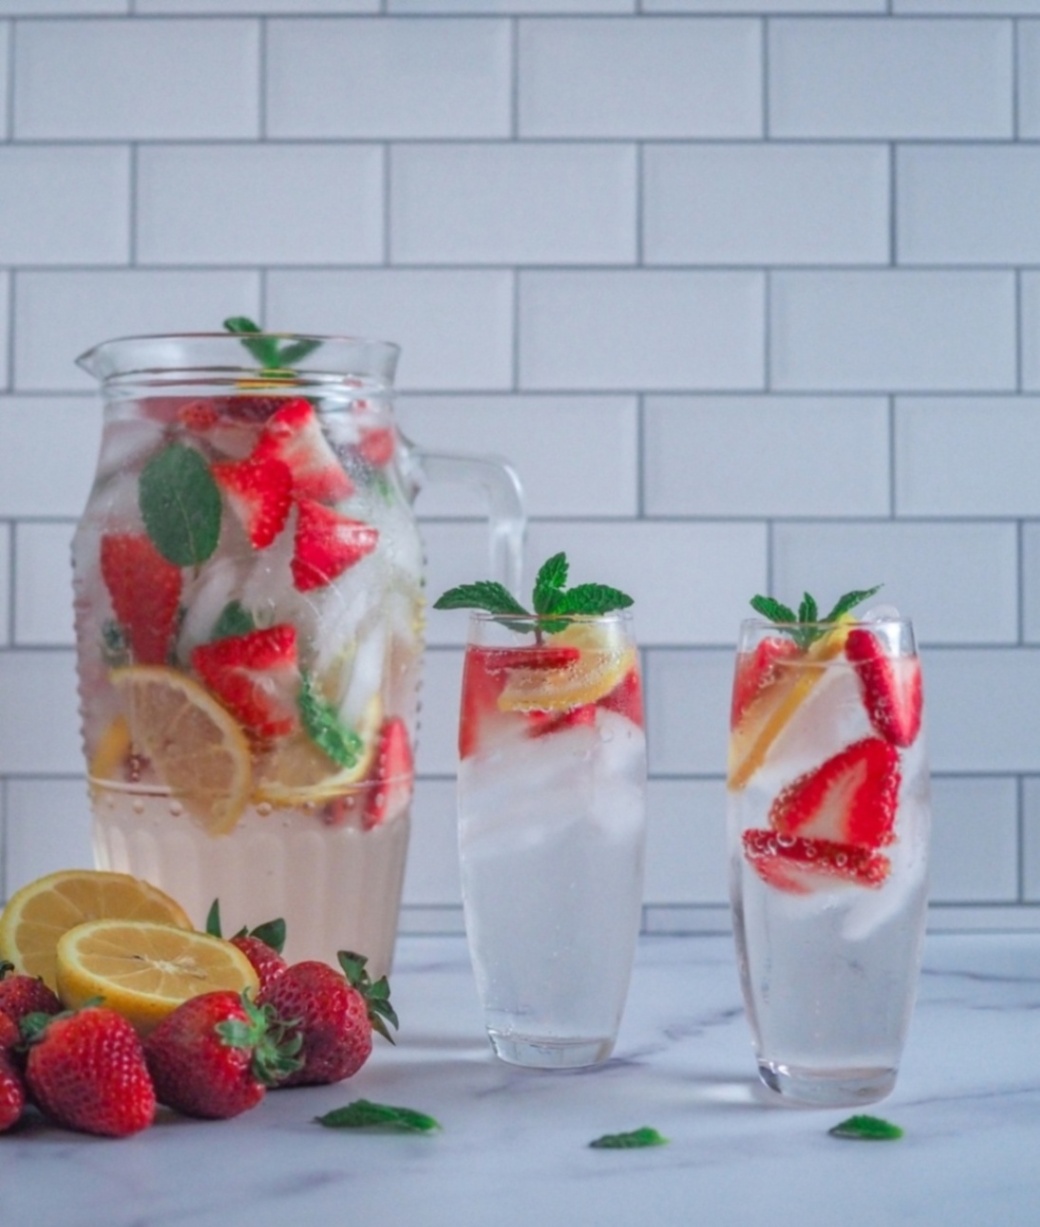 A pitcher of iced strawberry, lemon, and mint detox water